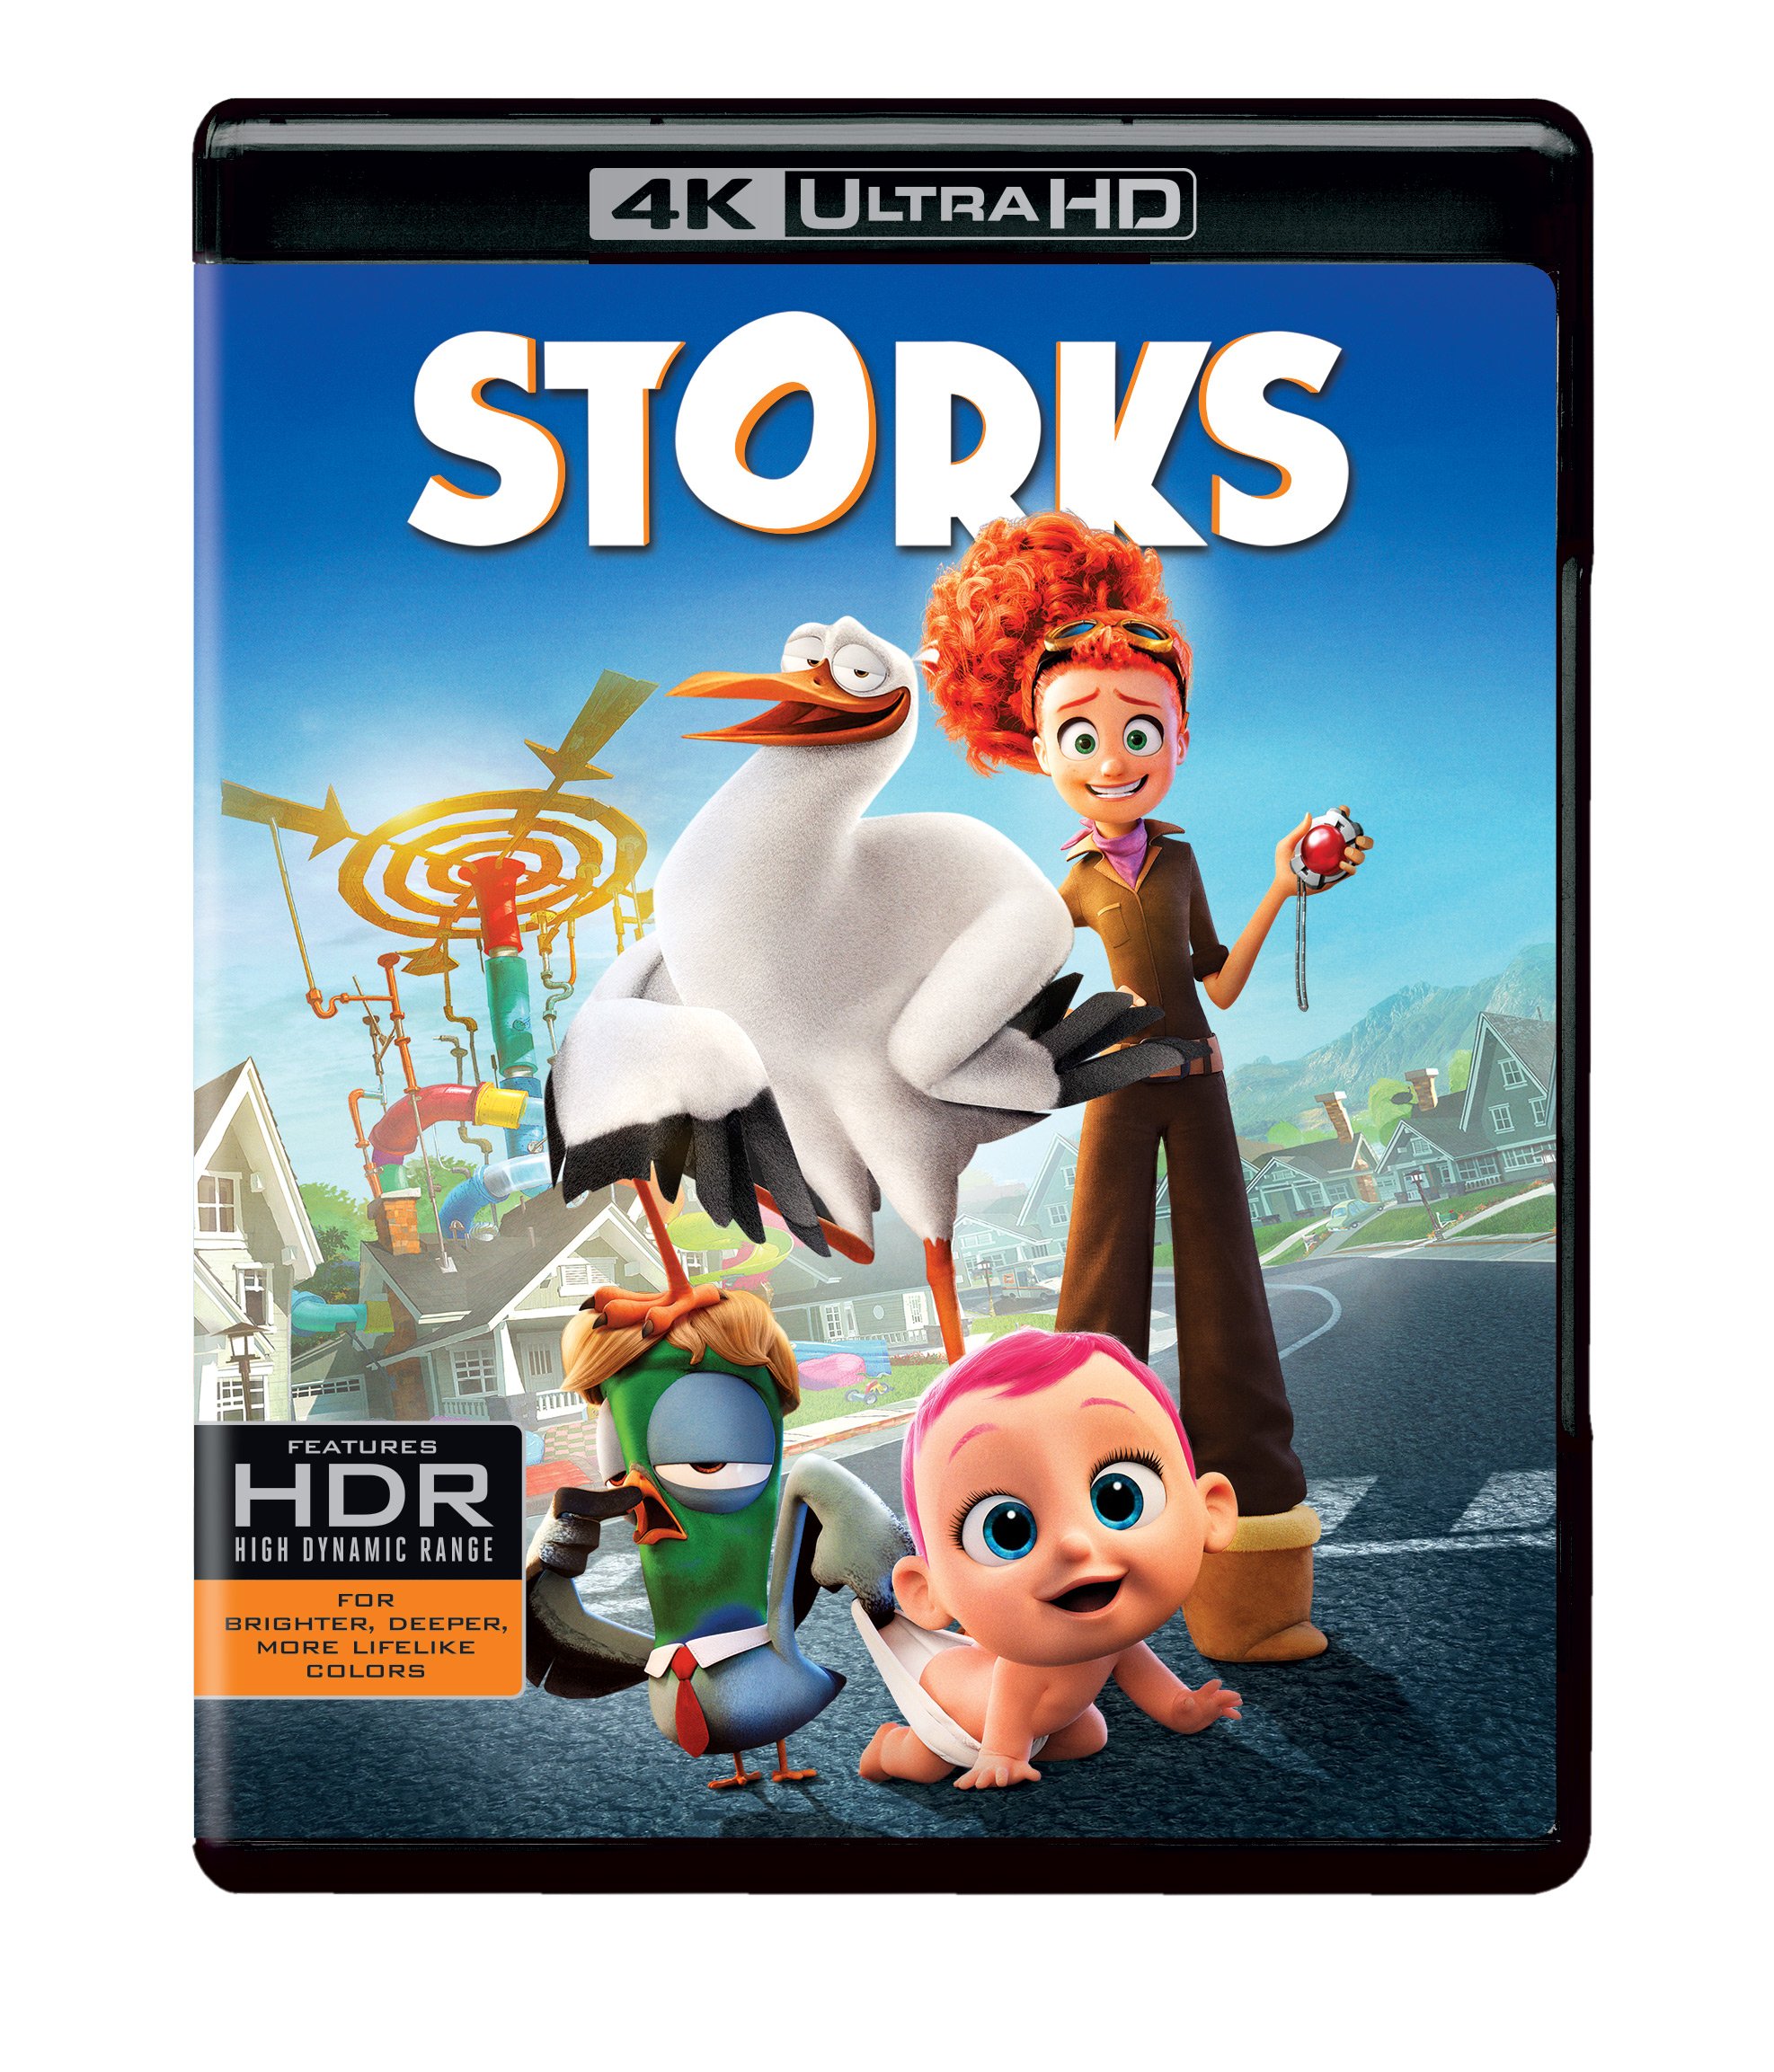 storks-4k-uhd-hd-movie-purchase-or-watch-online